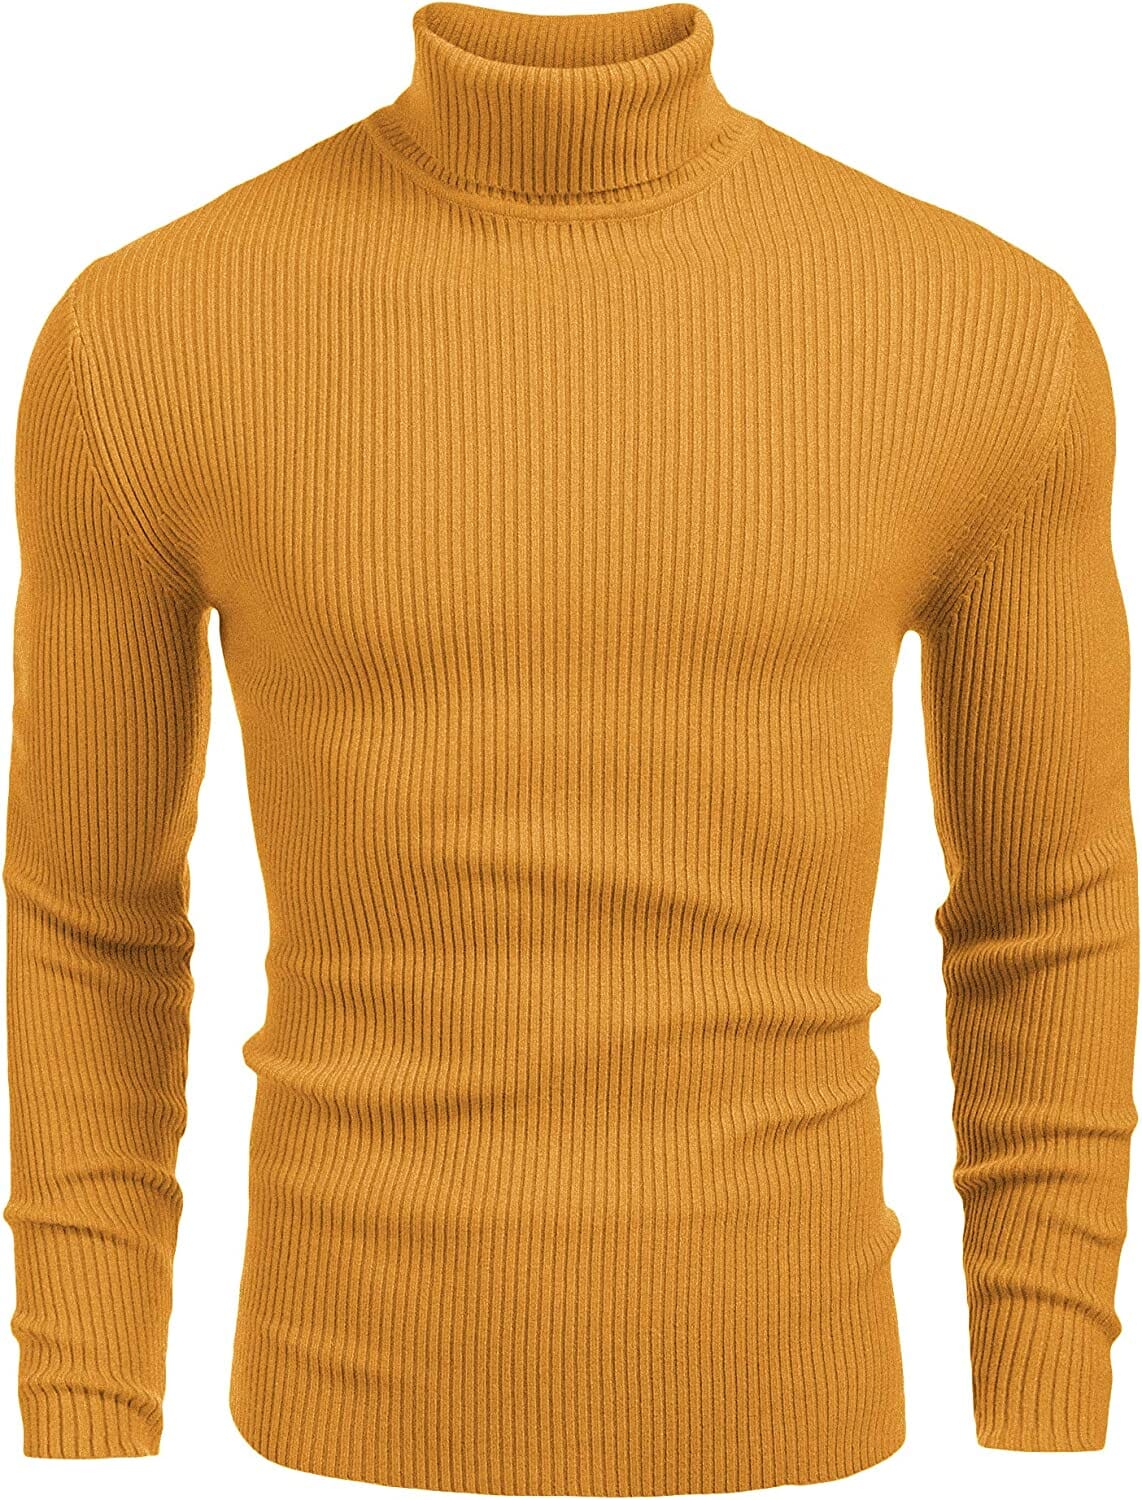 Ribbed Slim Fit Knitted Pullover Turtleneck Sweater (US Only) Sweaters COOFANDY Store Yellow S 